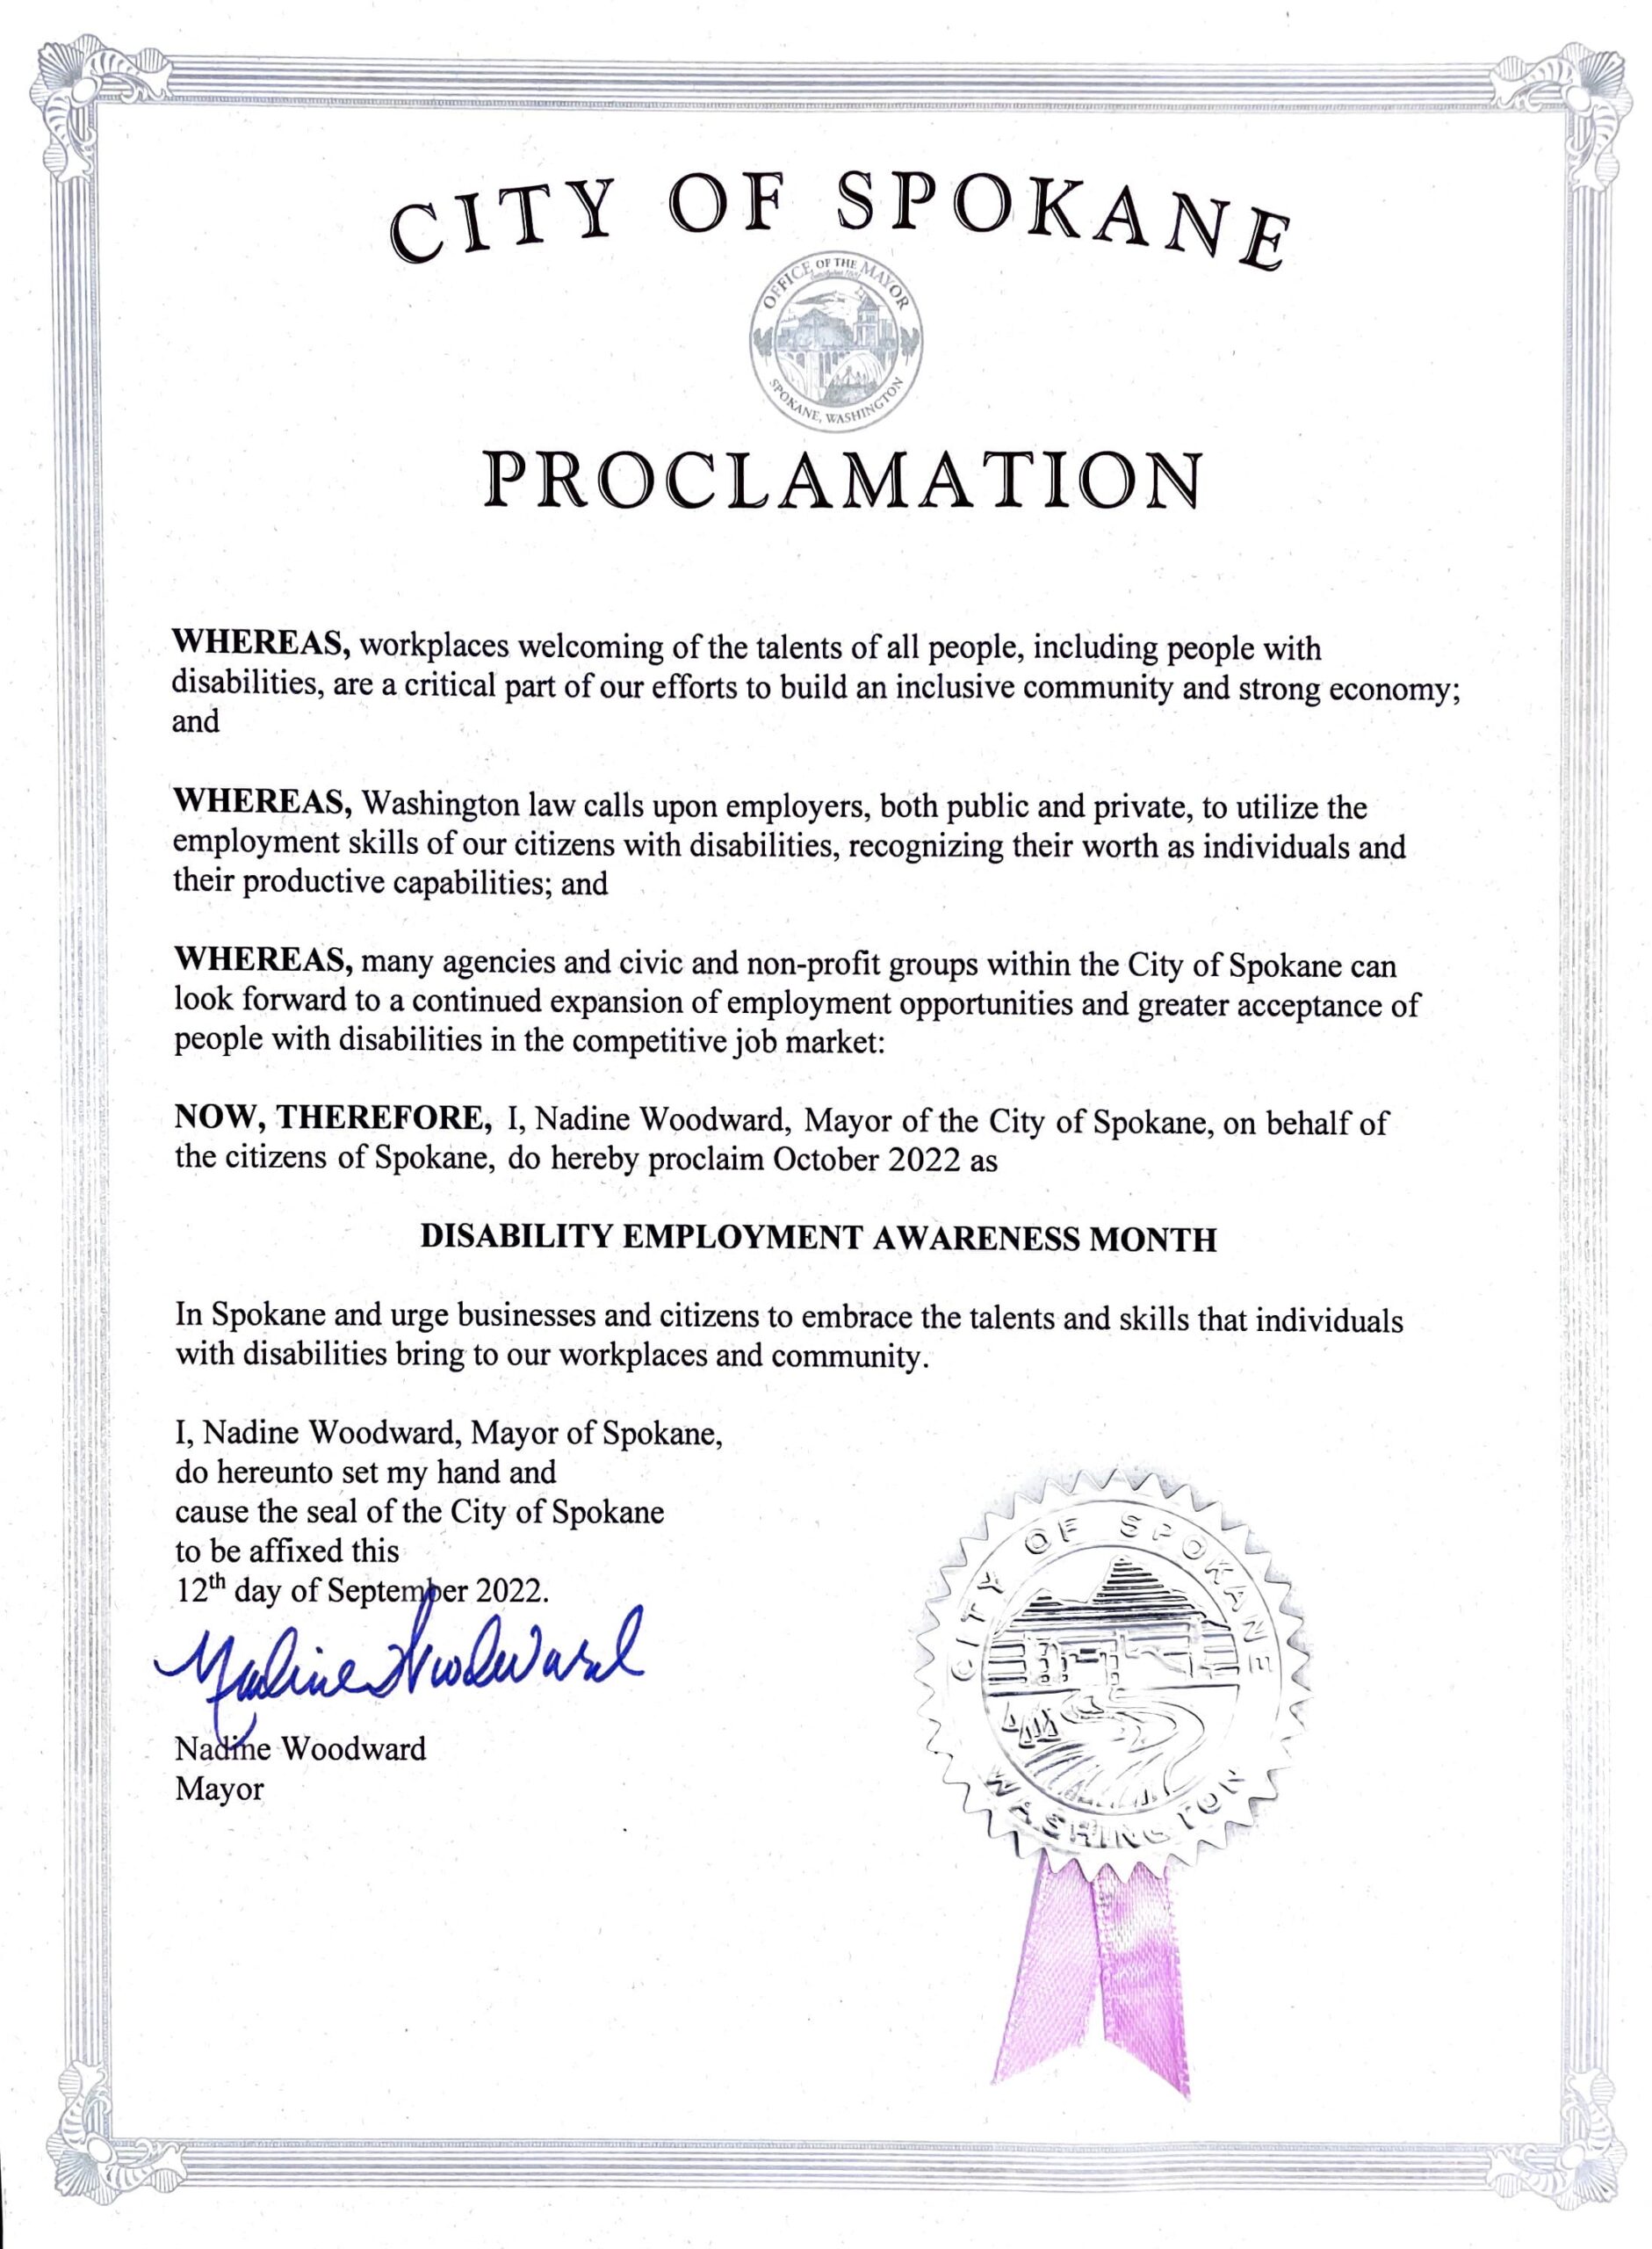 Image of City of Spokane's Proclamation for Disability Employment Awareness Month